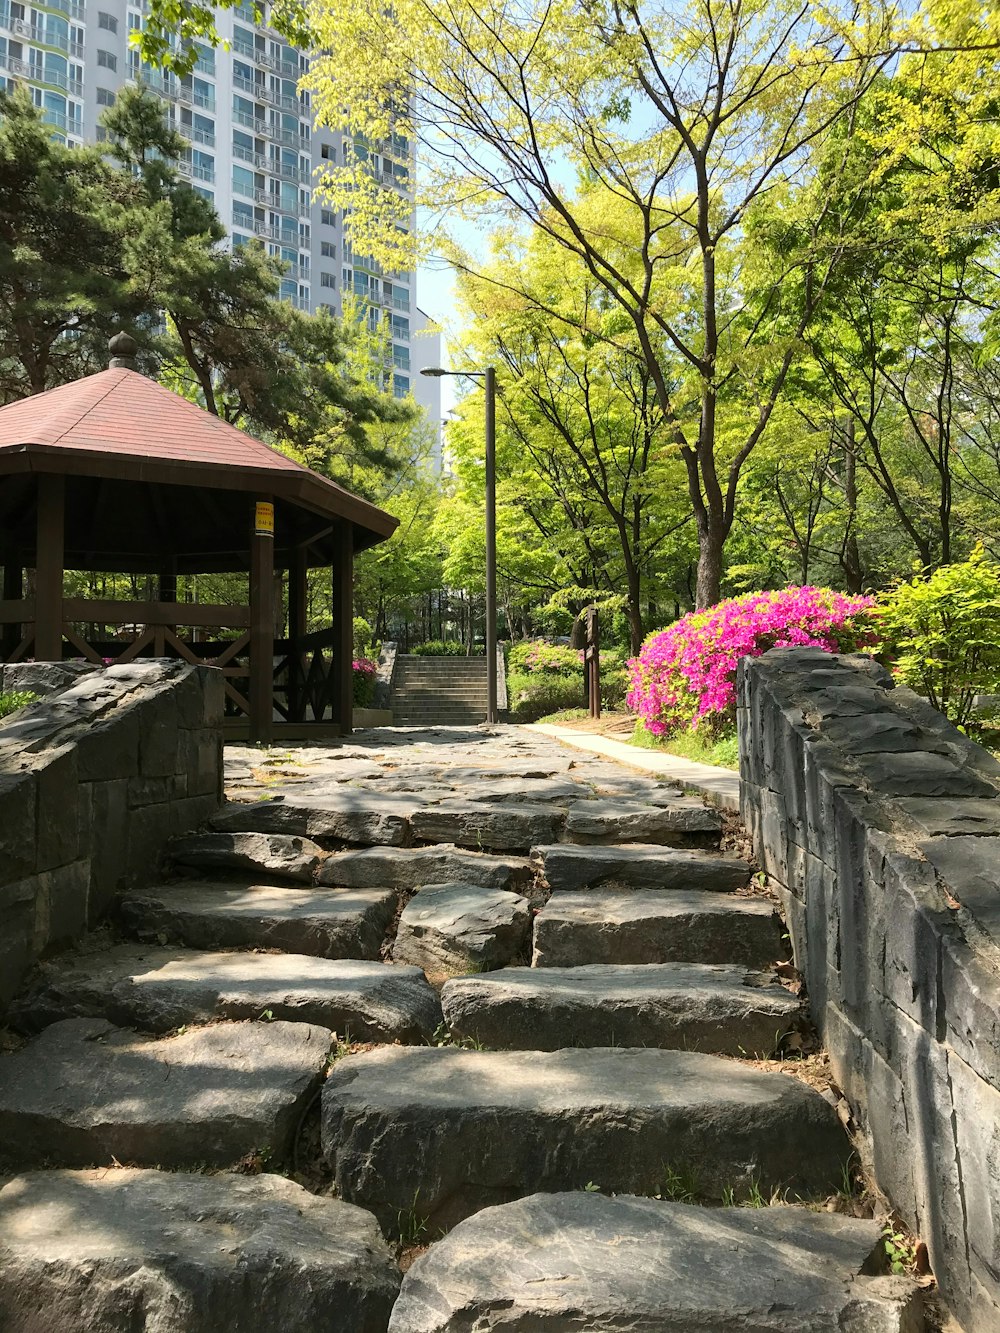 a stone path in a park with a gazebo in the background